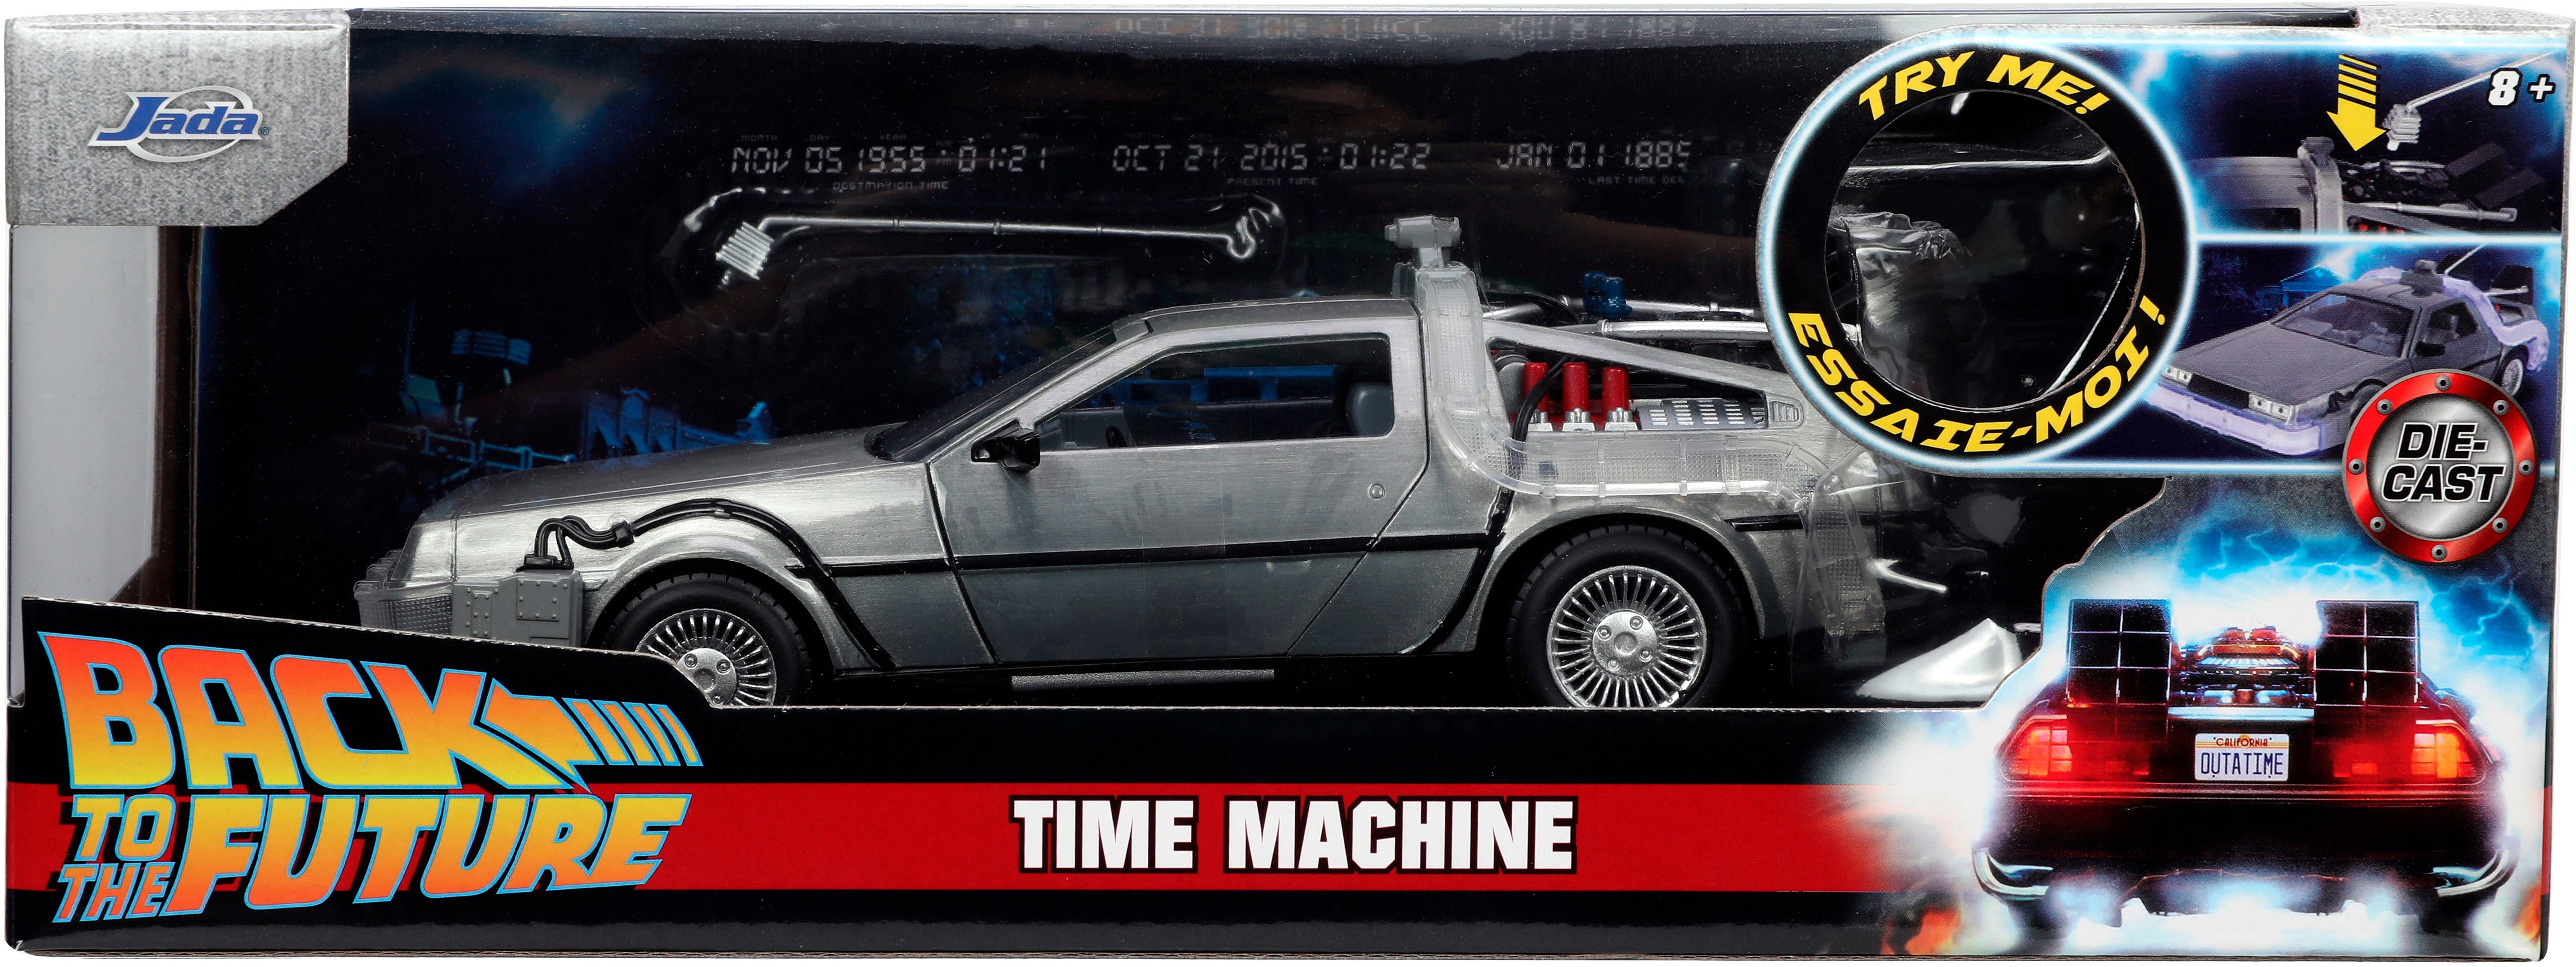 1/24 scale 1/25 scale Back to the Future detail set for Delorean models/diecasts 